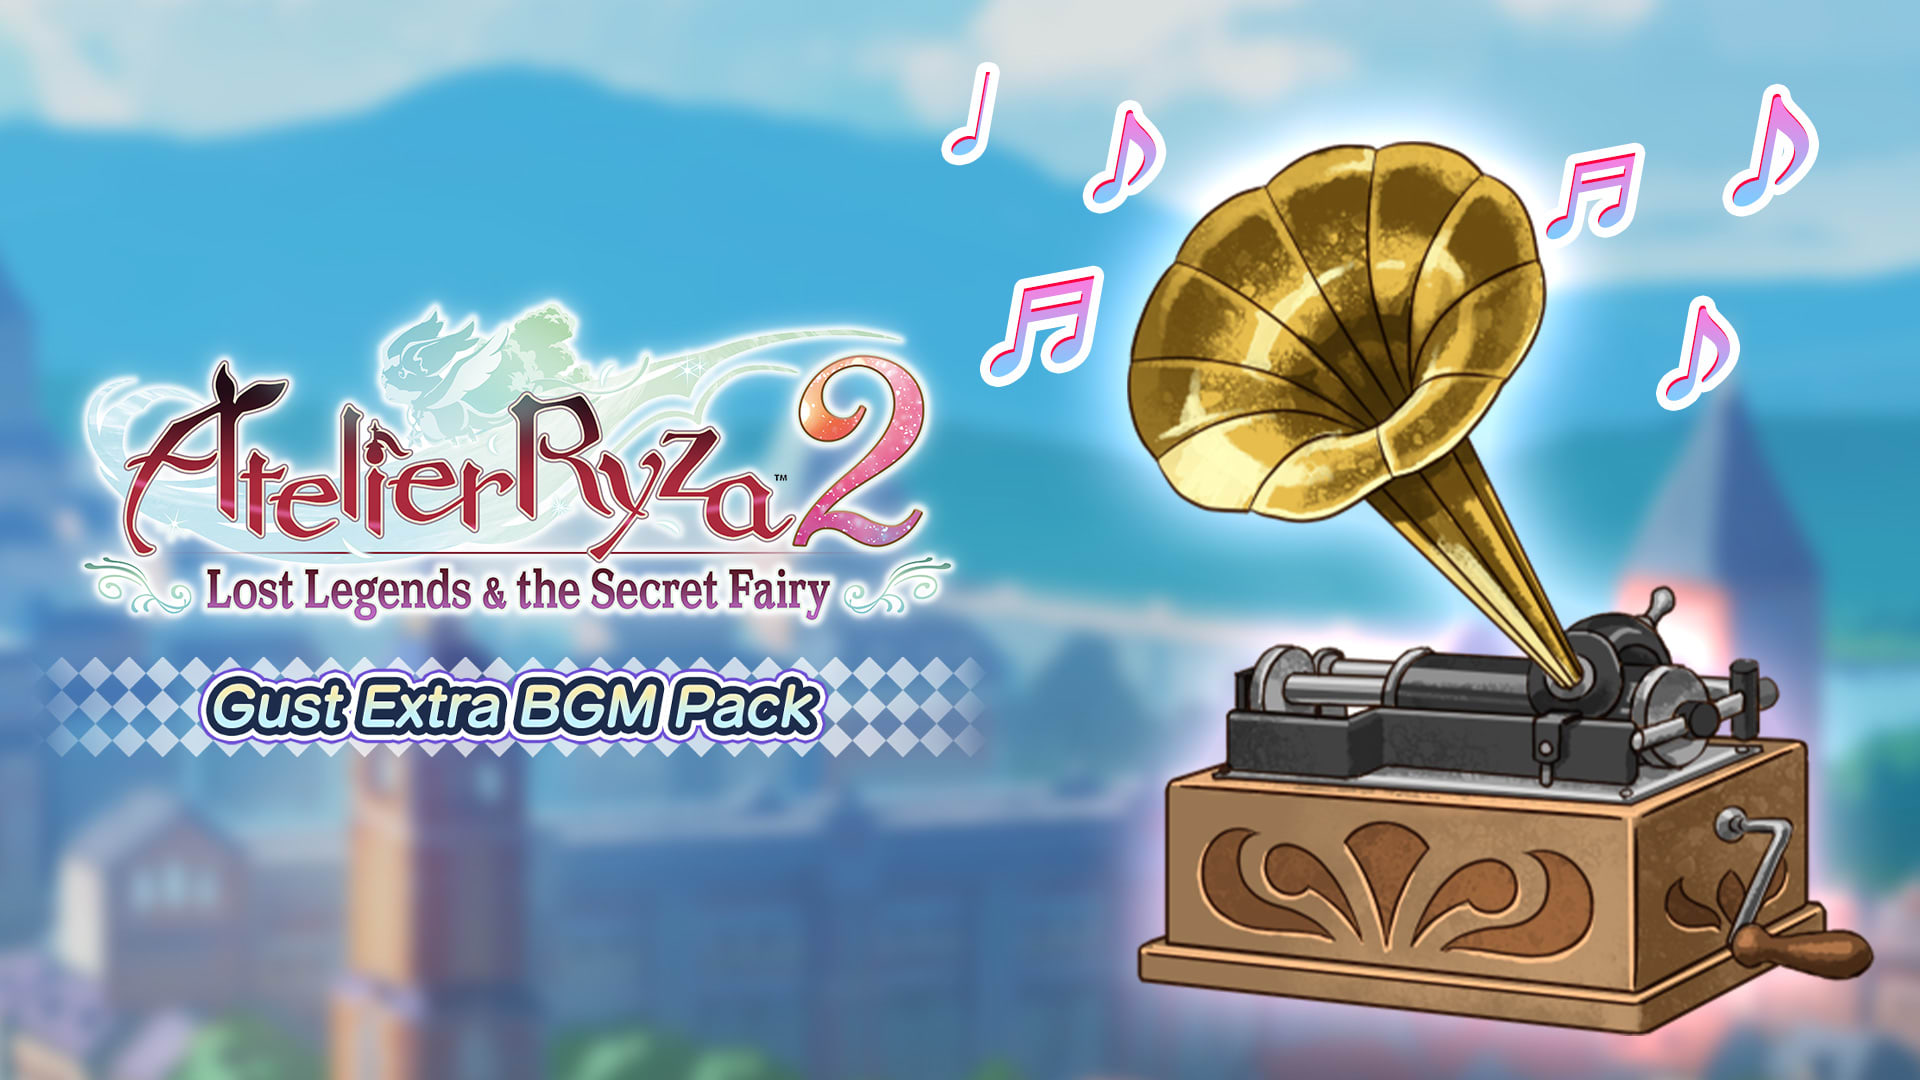 Gust Extra BGM Pack